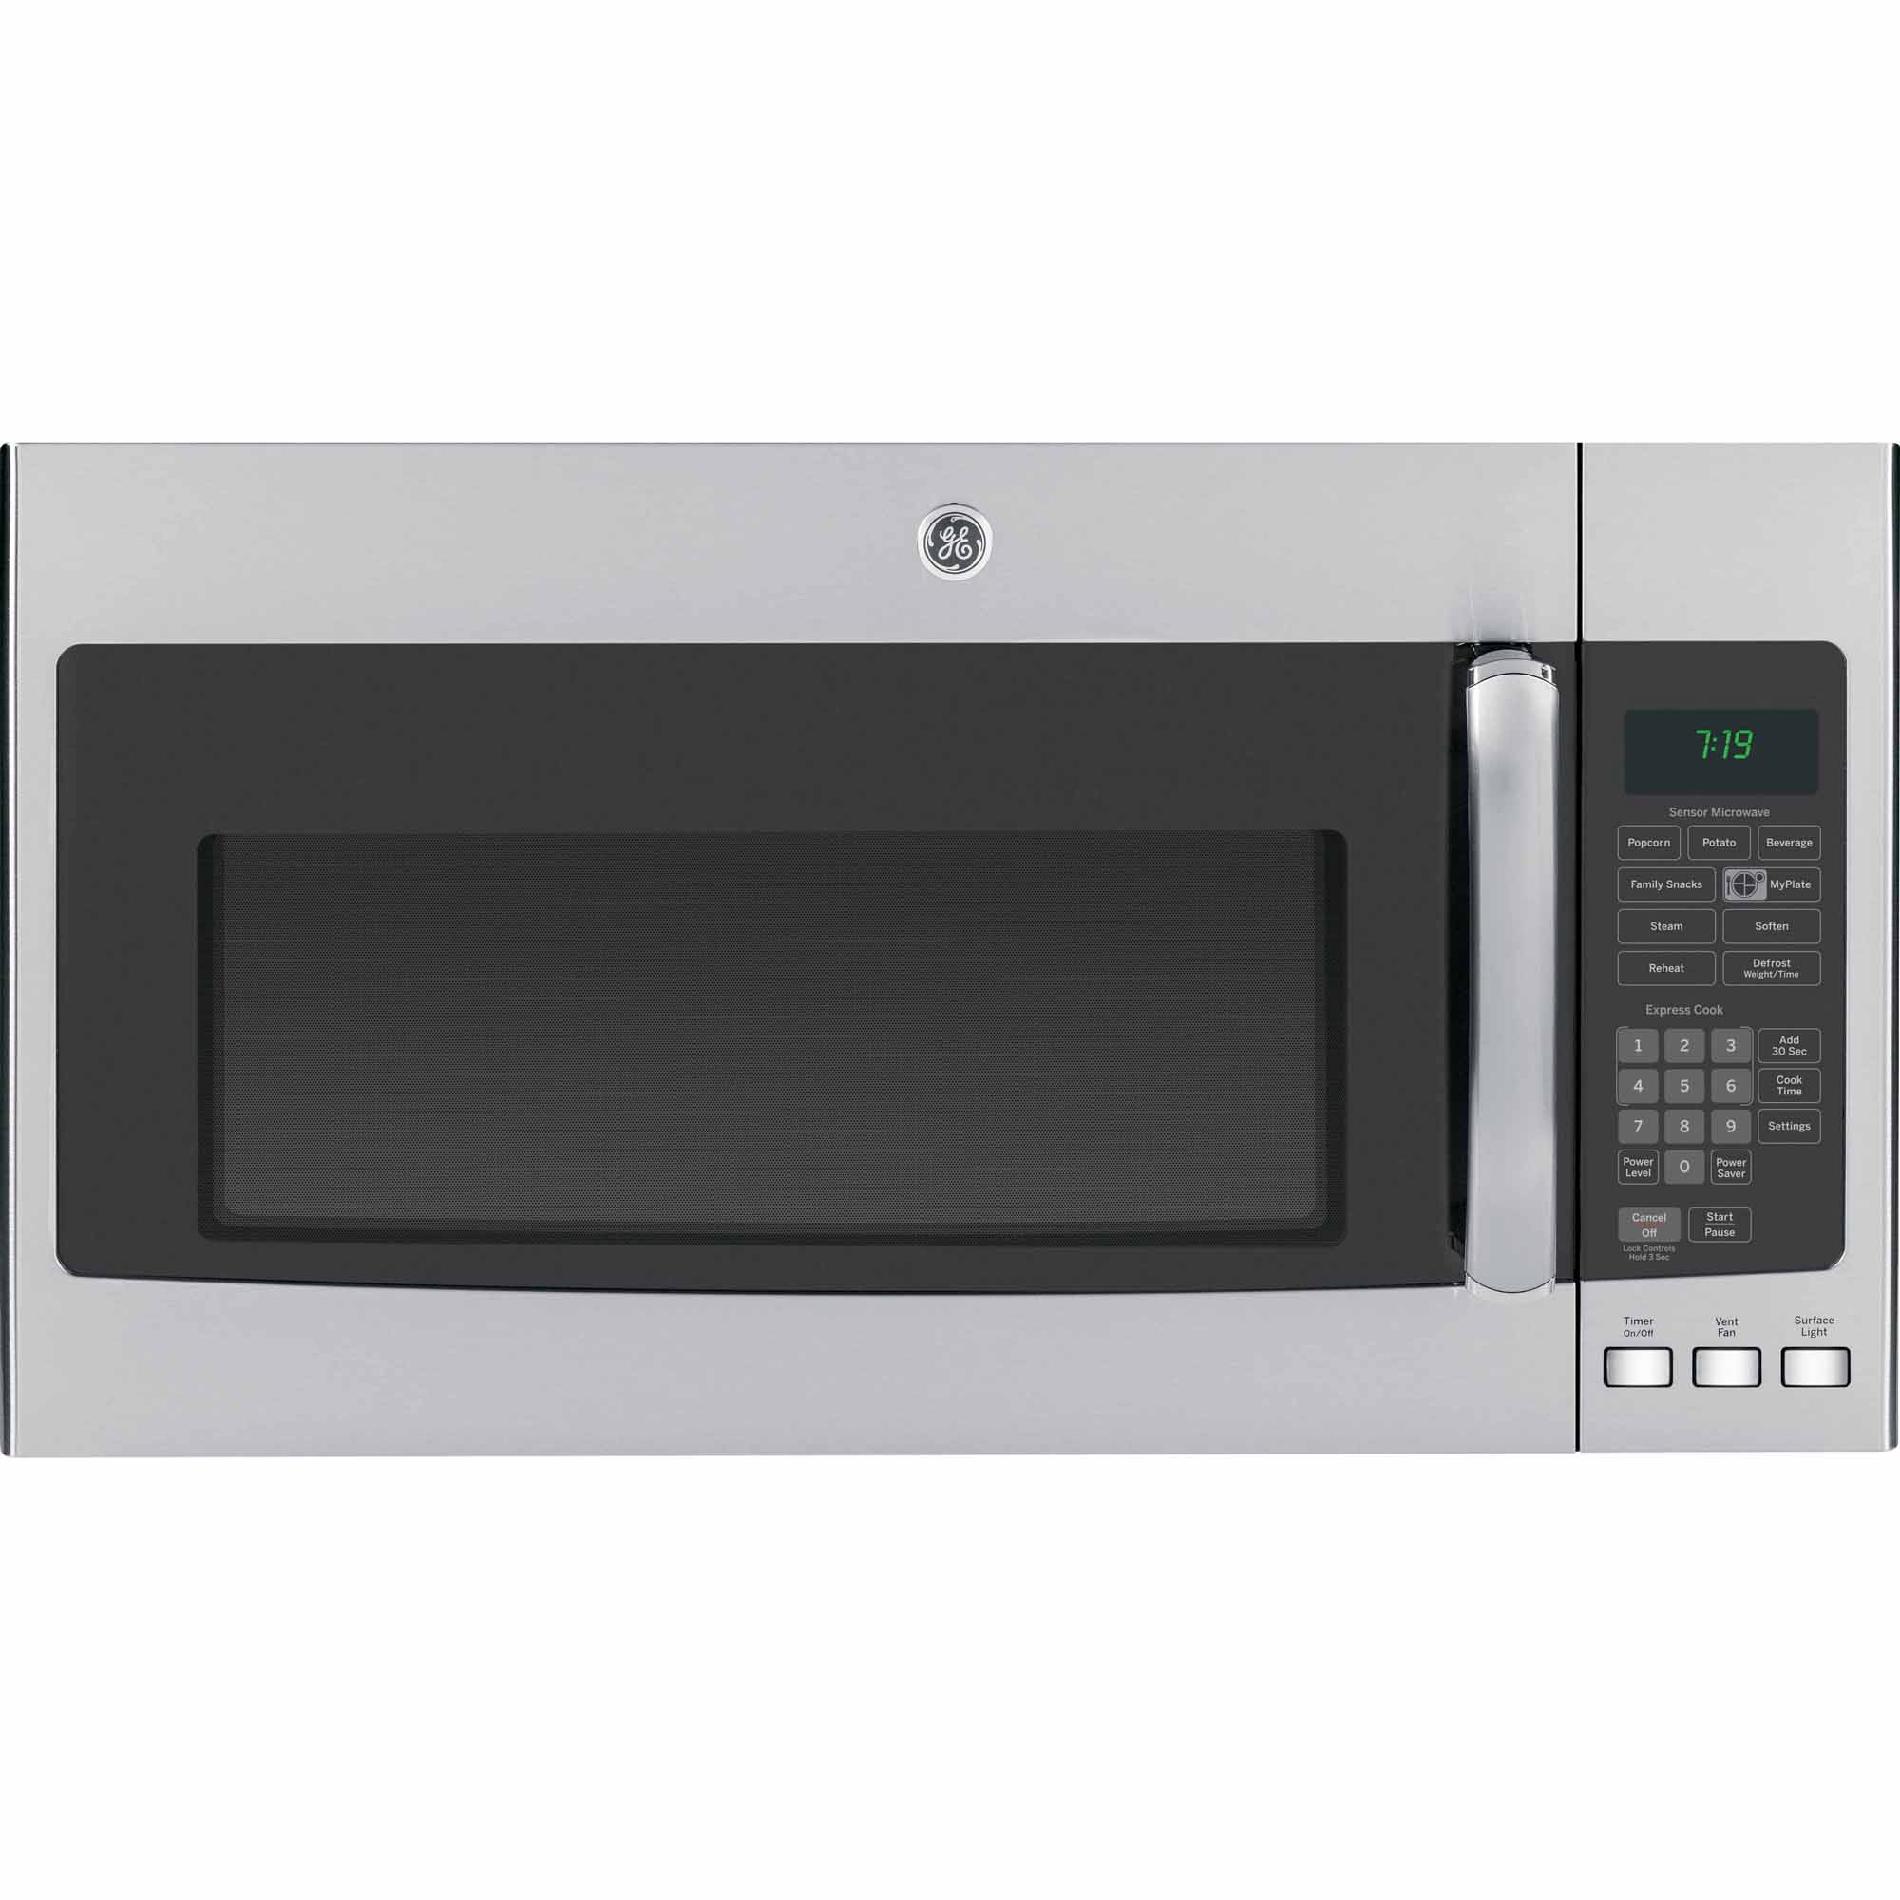 GE 1.9 cu. ft. Over-the-Range Microwave - Stainless Steel